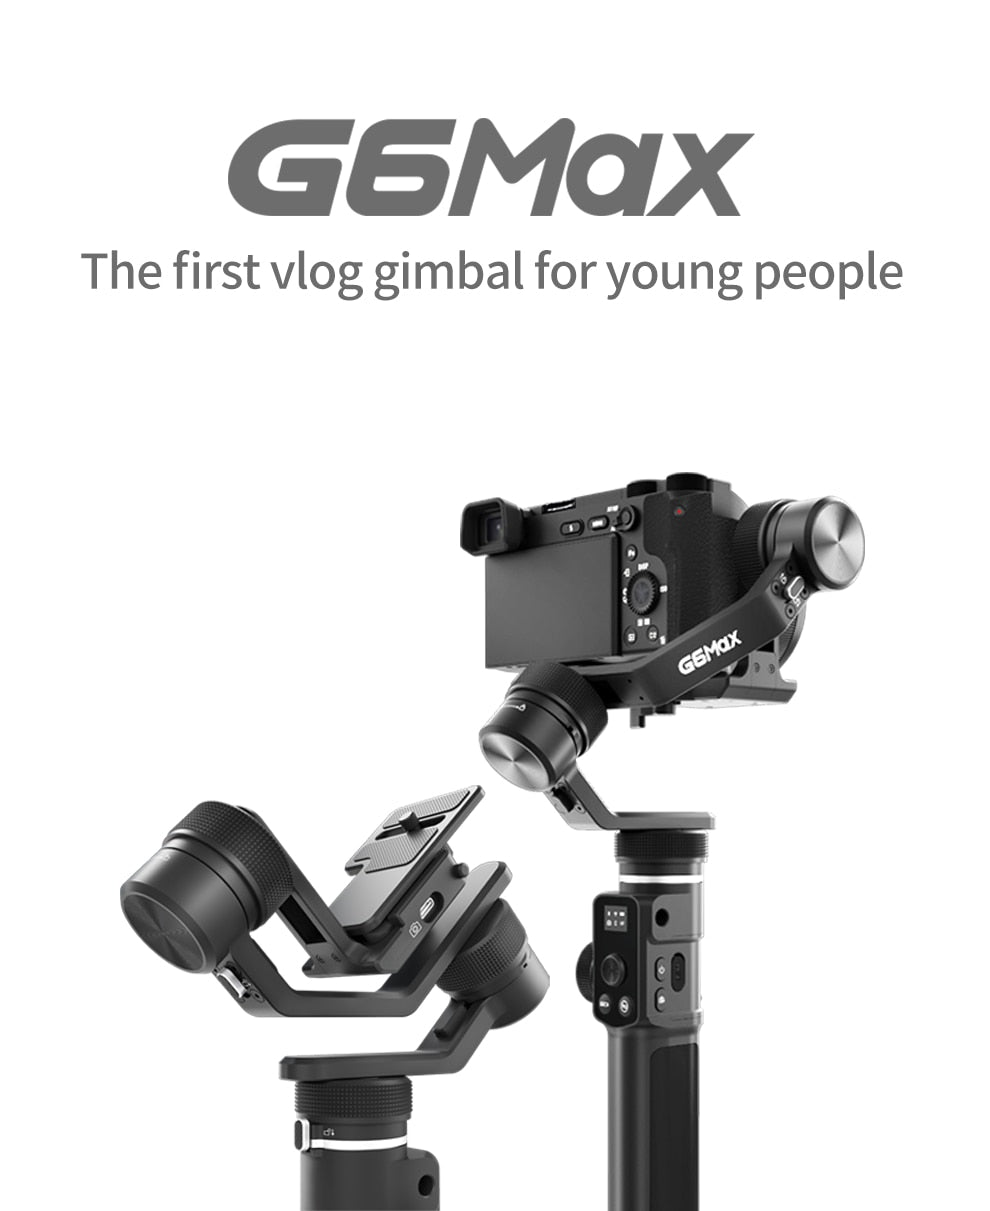 FeiyuTech Official G6 Max 3-Axis Handheld Gimbal Stabilizer for Mirrorless Pocket Action Camera Sony ZV1 Canon GoPro 8